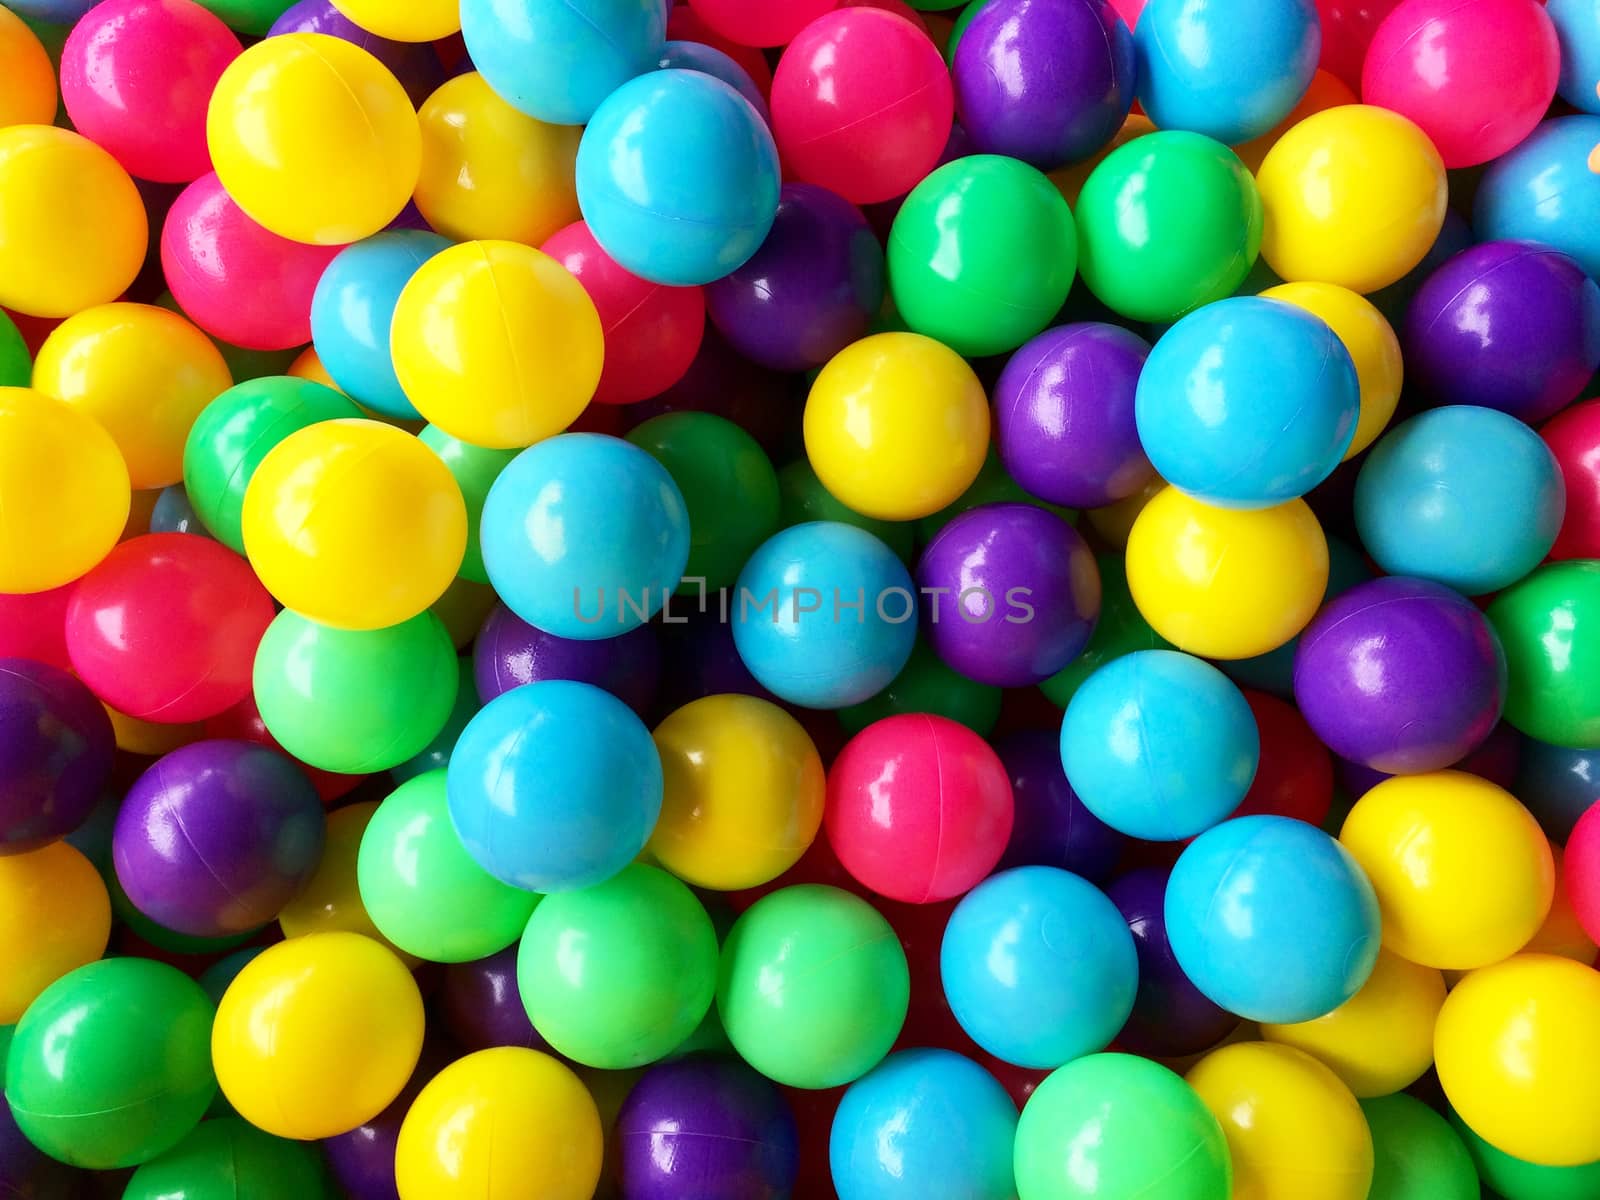 dry children's pool with colorful balls